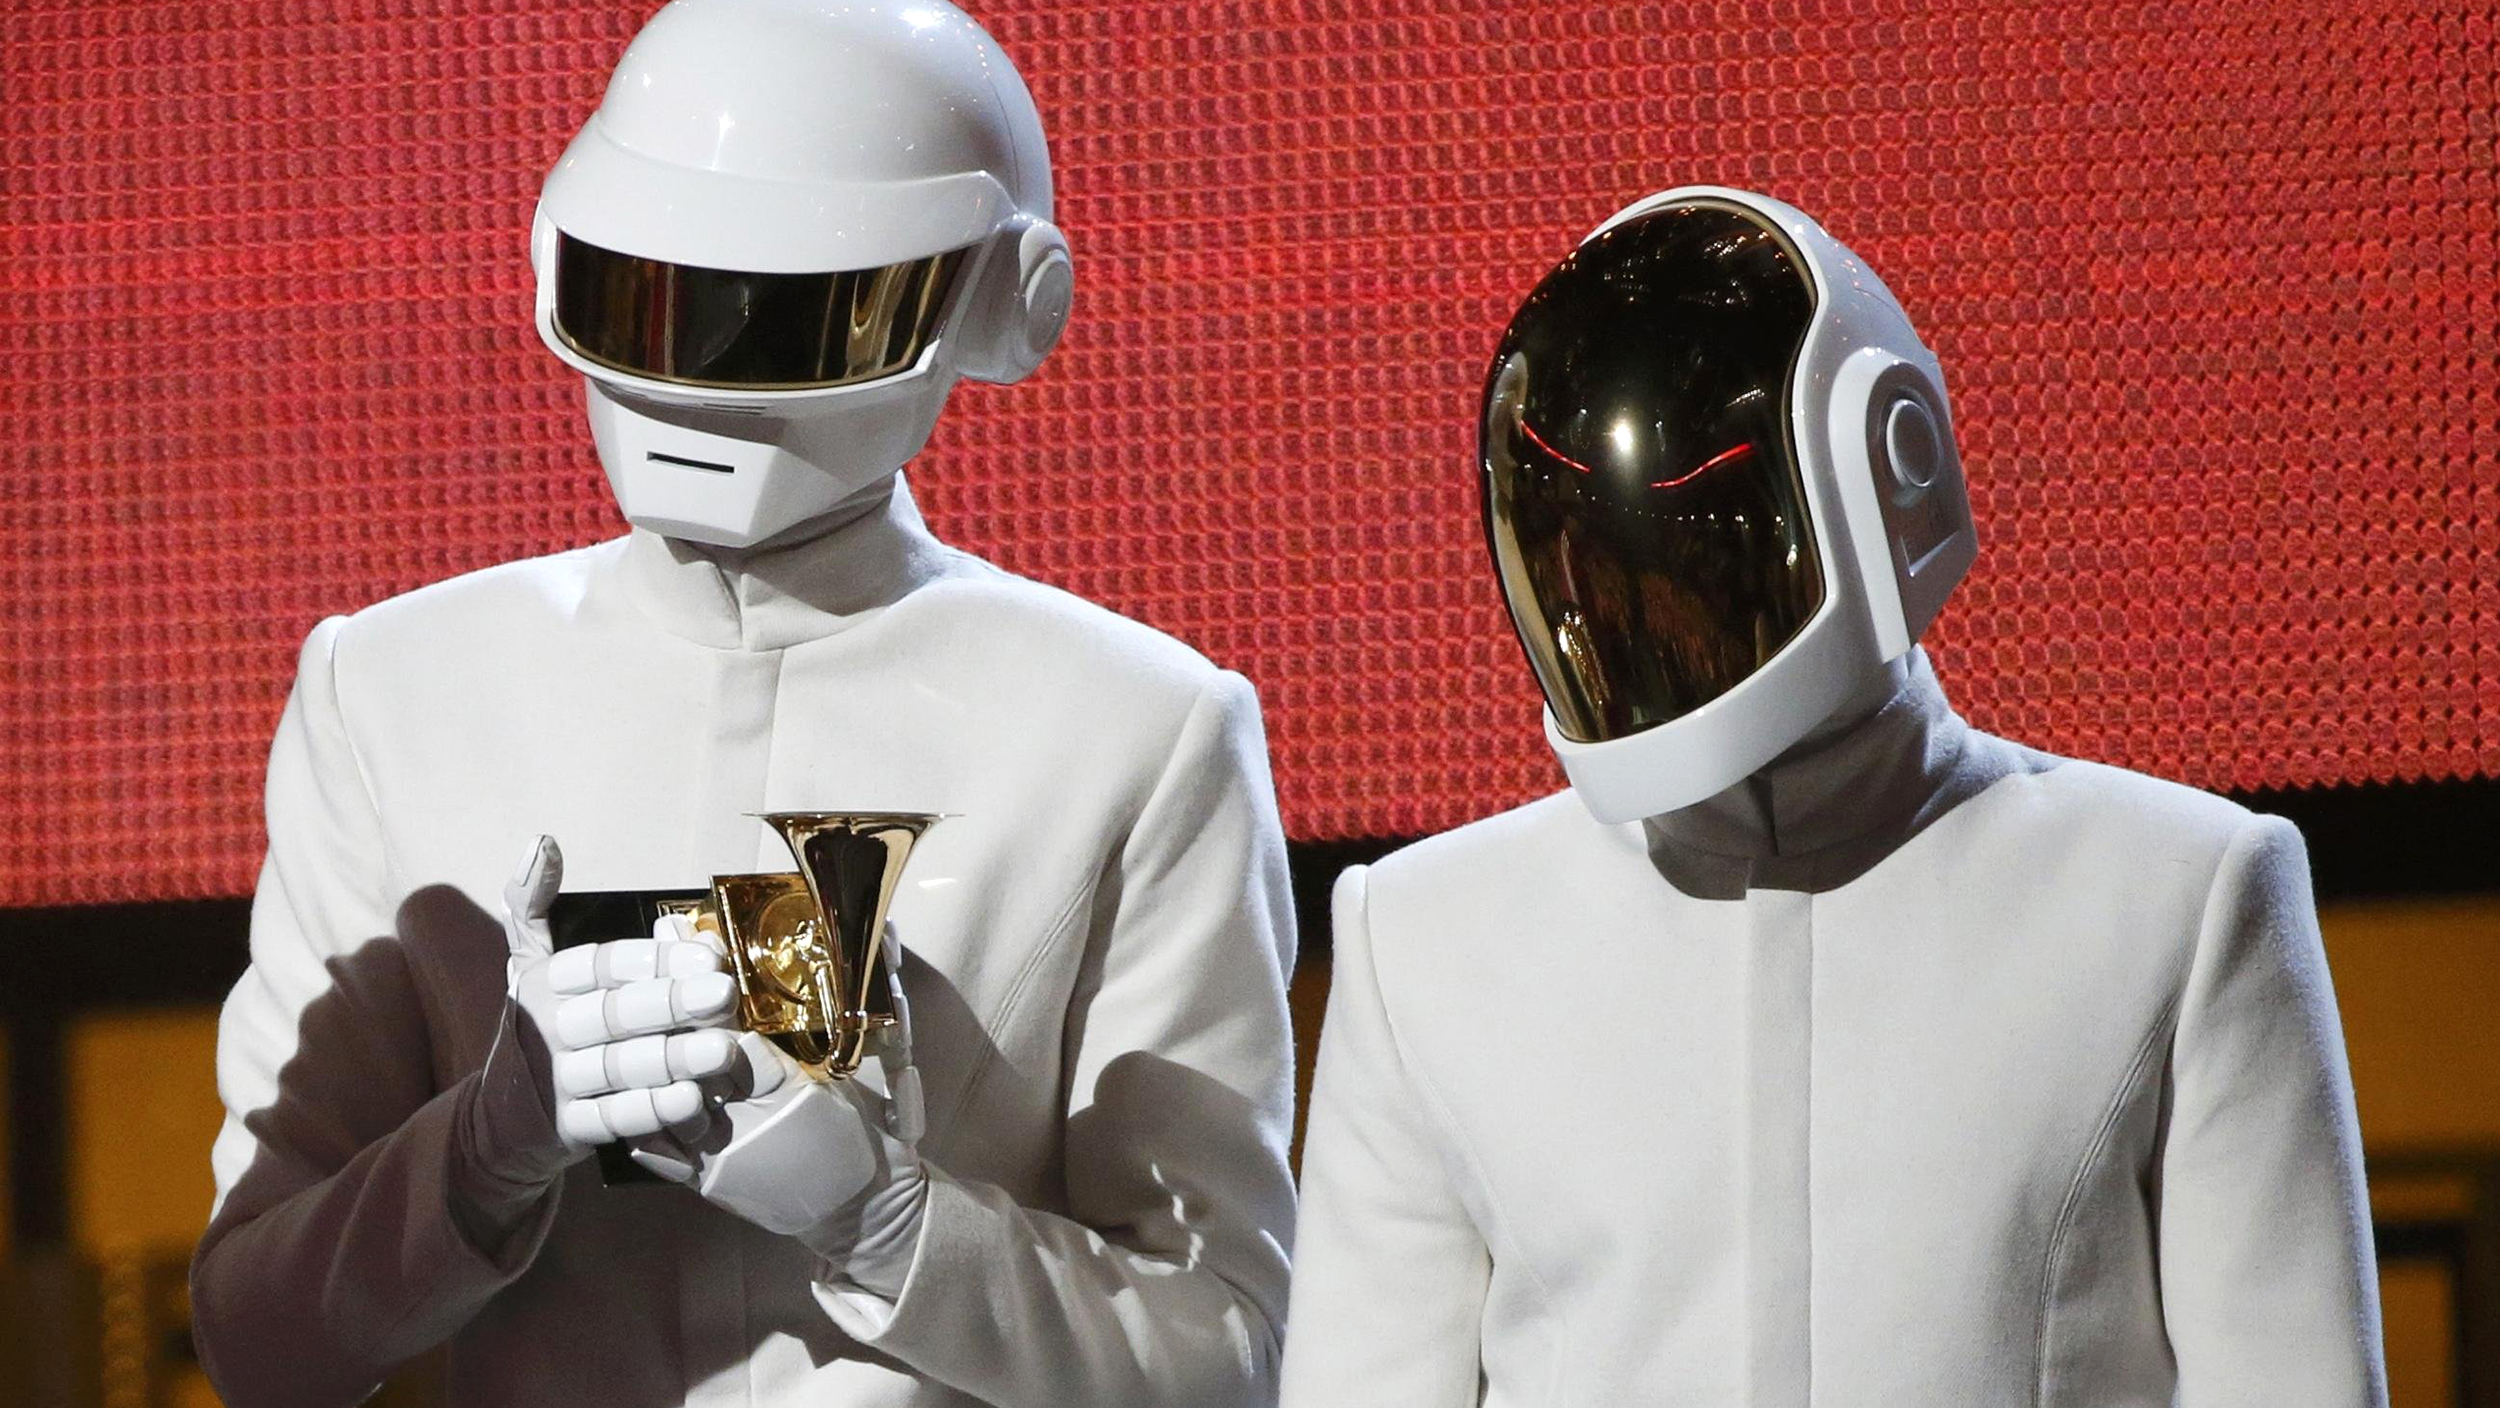 Daft Punk, Lorde win big at retro-flavored Grammy Awards - TODAY.com